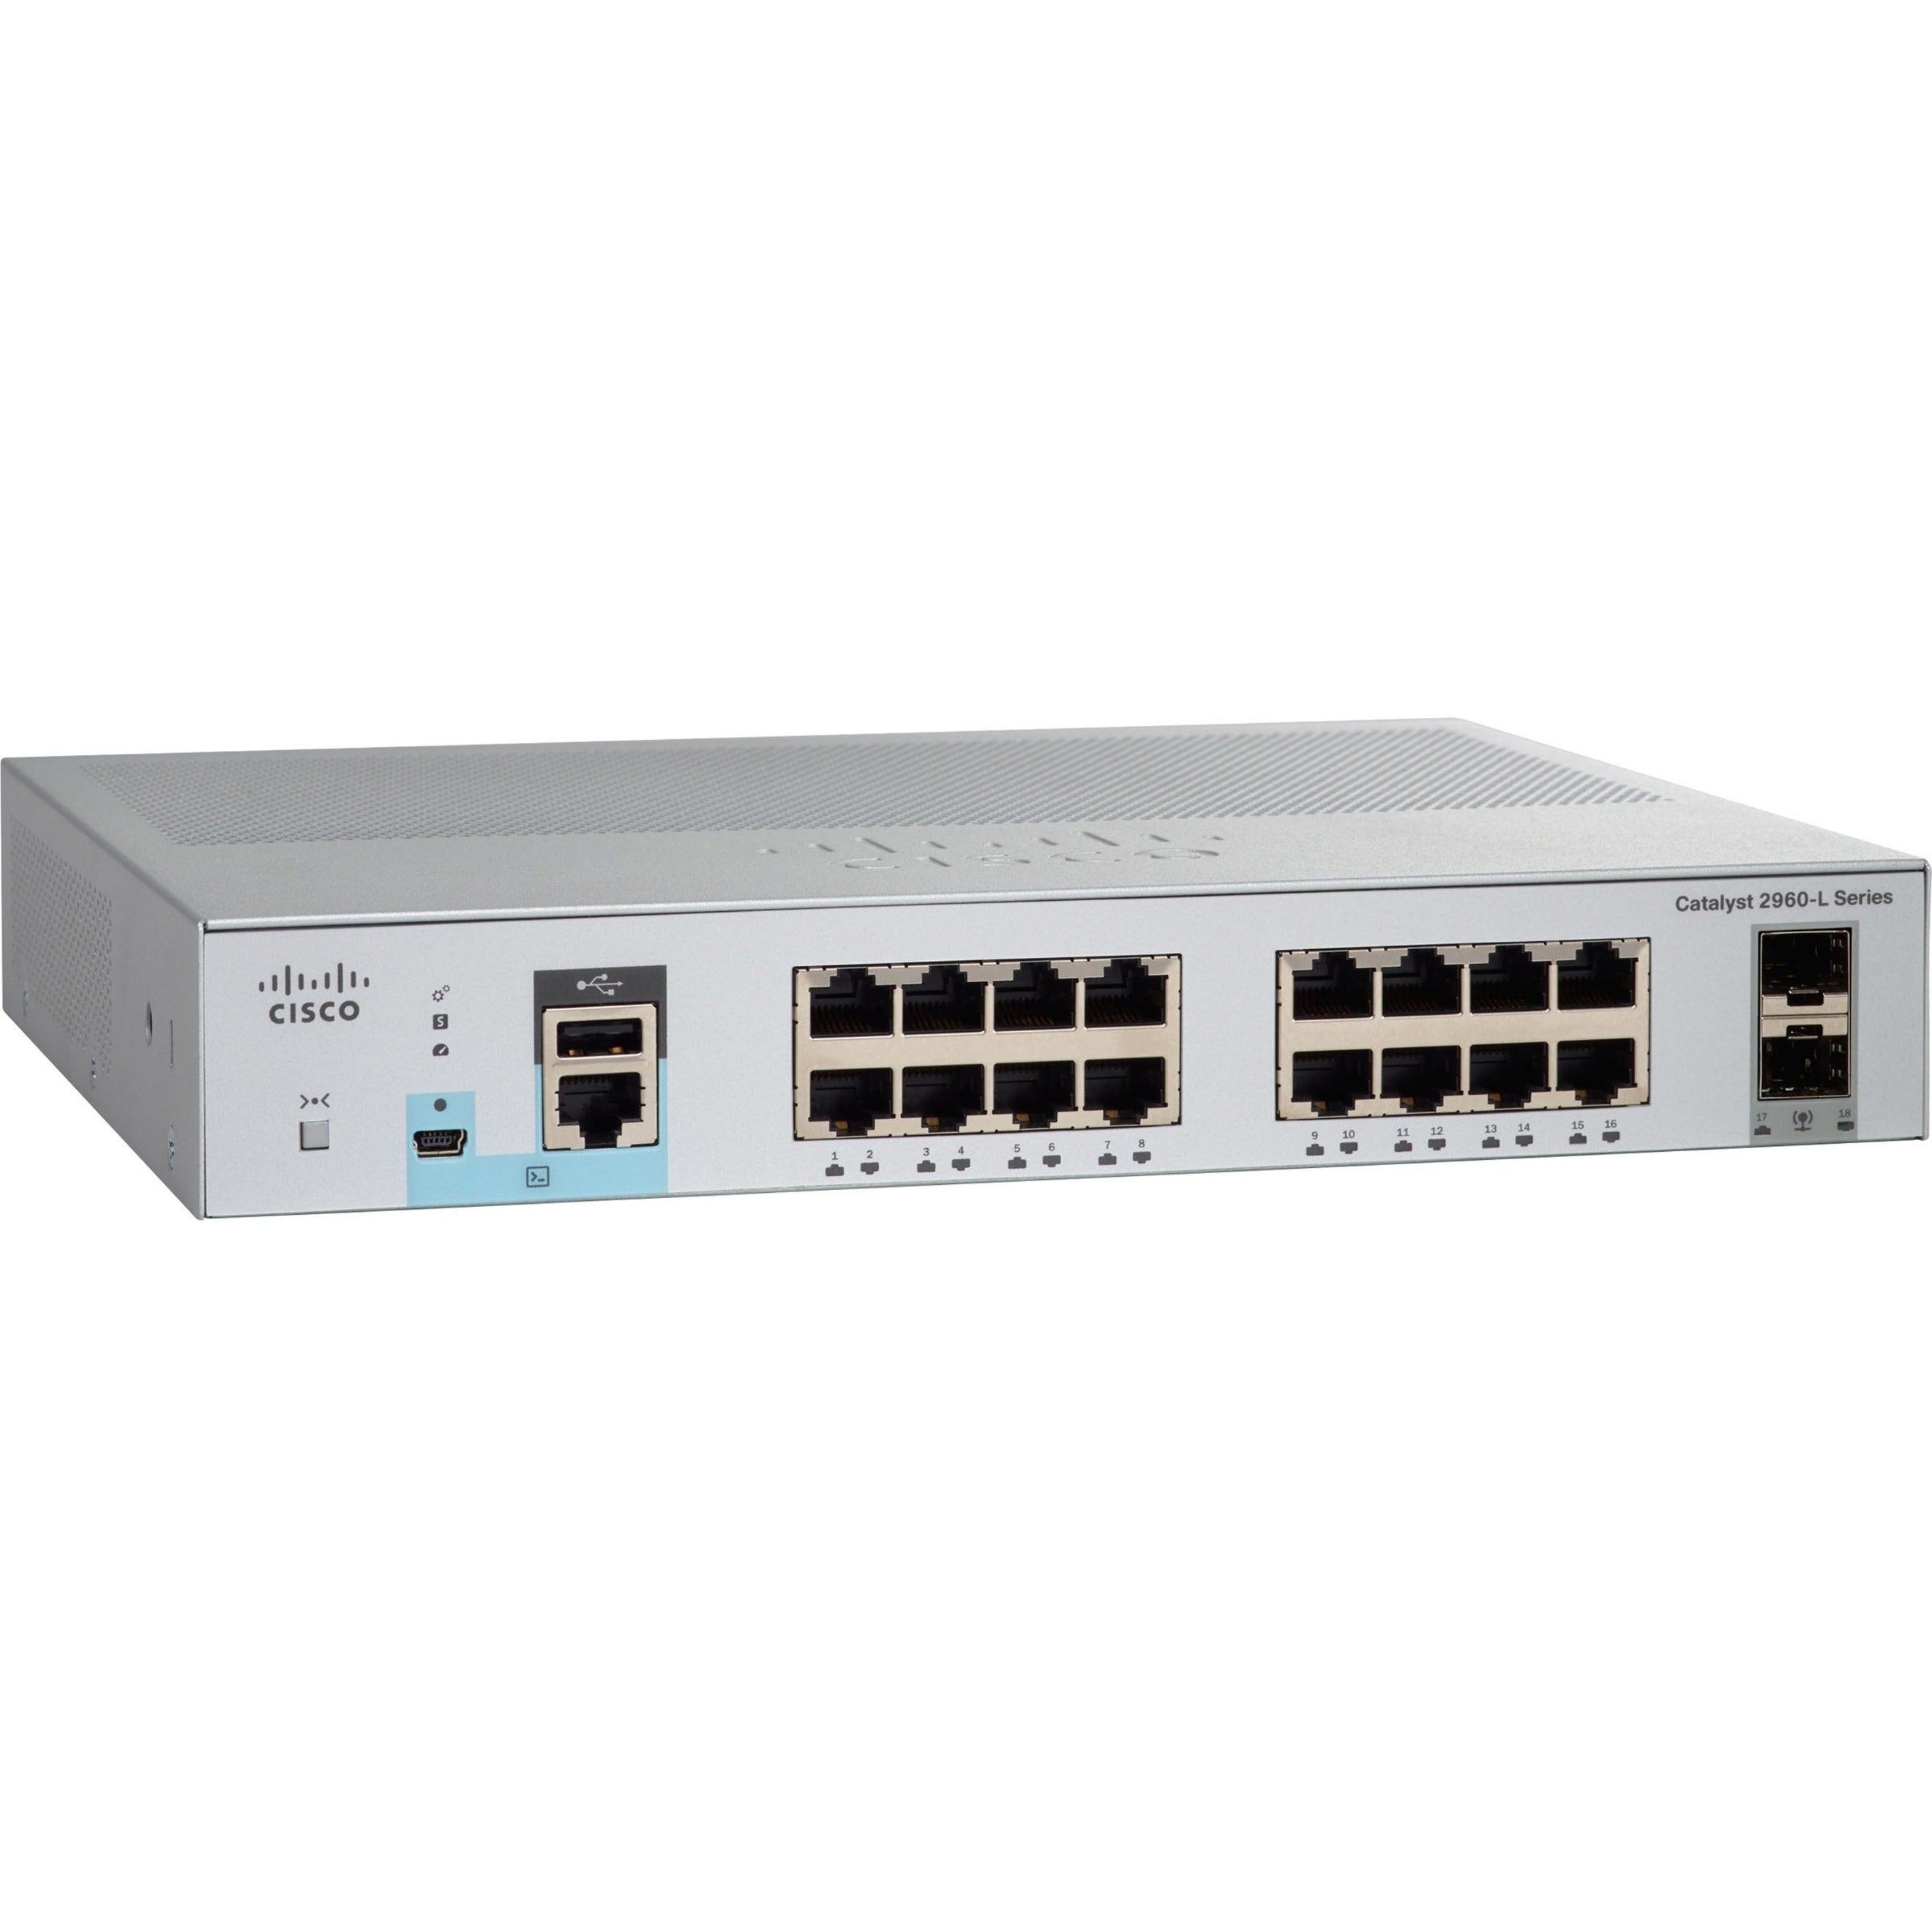 Cisco WS-C2960L-8TS-LL Catalyst Ethernet Switch, 8-Port Gigabit, Power Supply Included